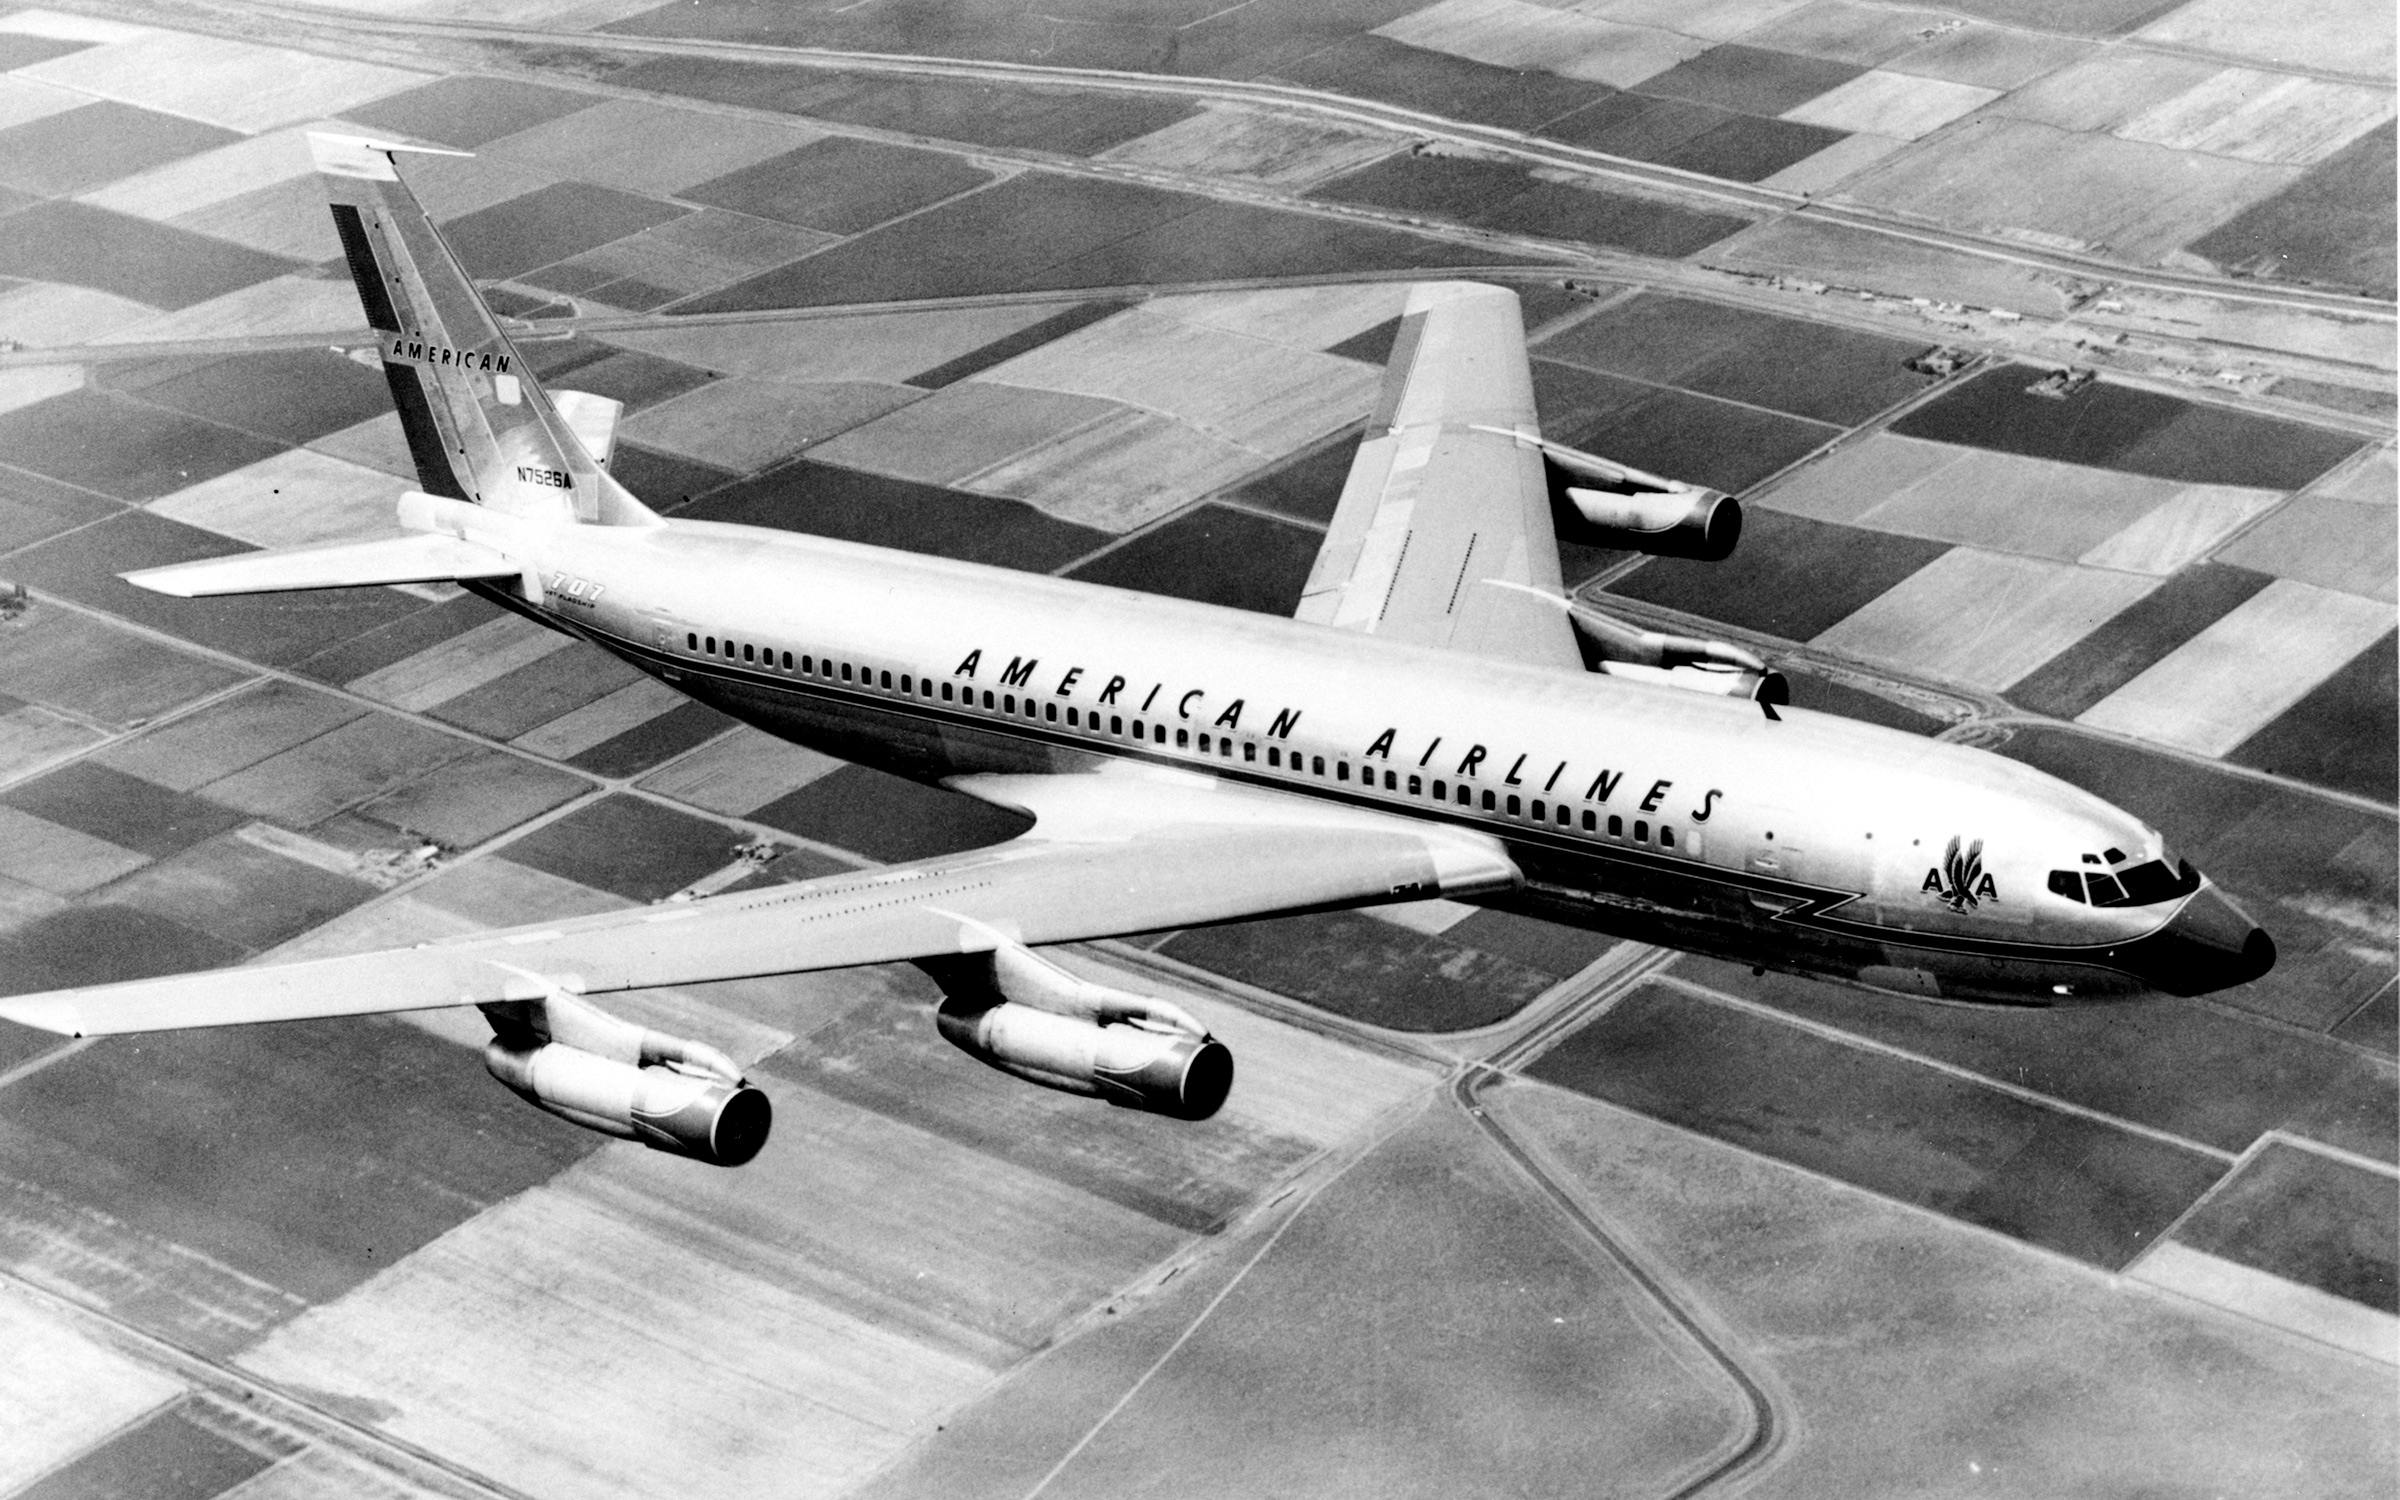 A 1960 photo of a an American Airlines Boeing 707-102-B in flight.